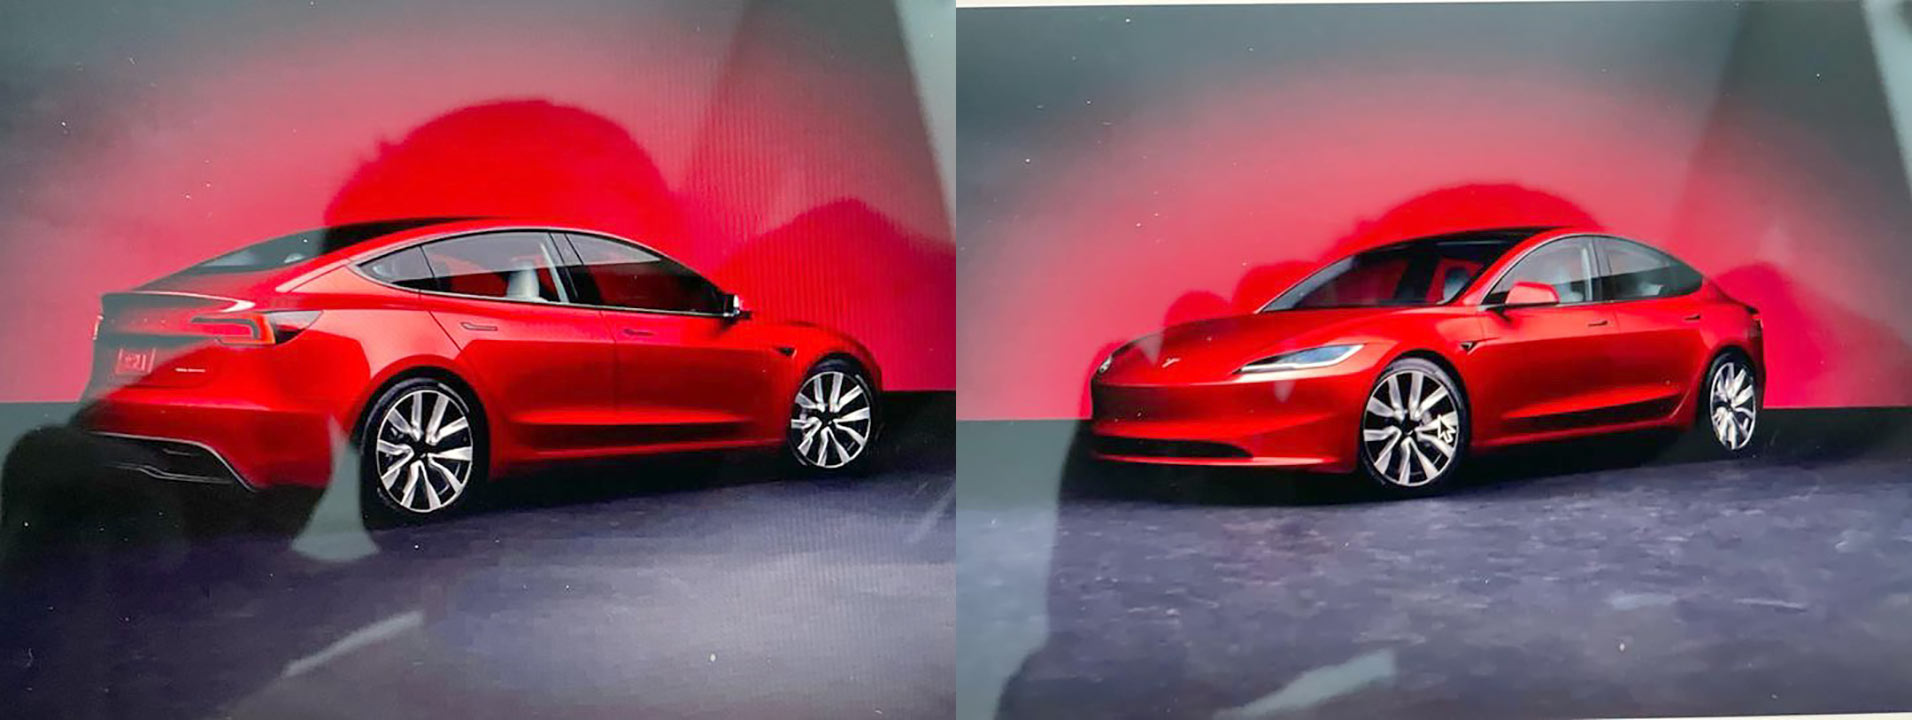 First existing vehicles at the new Tesla Model 3 Highland